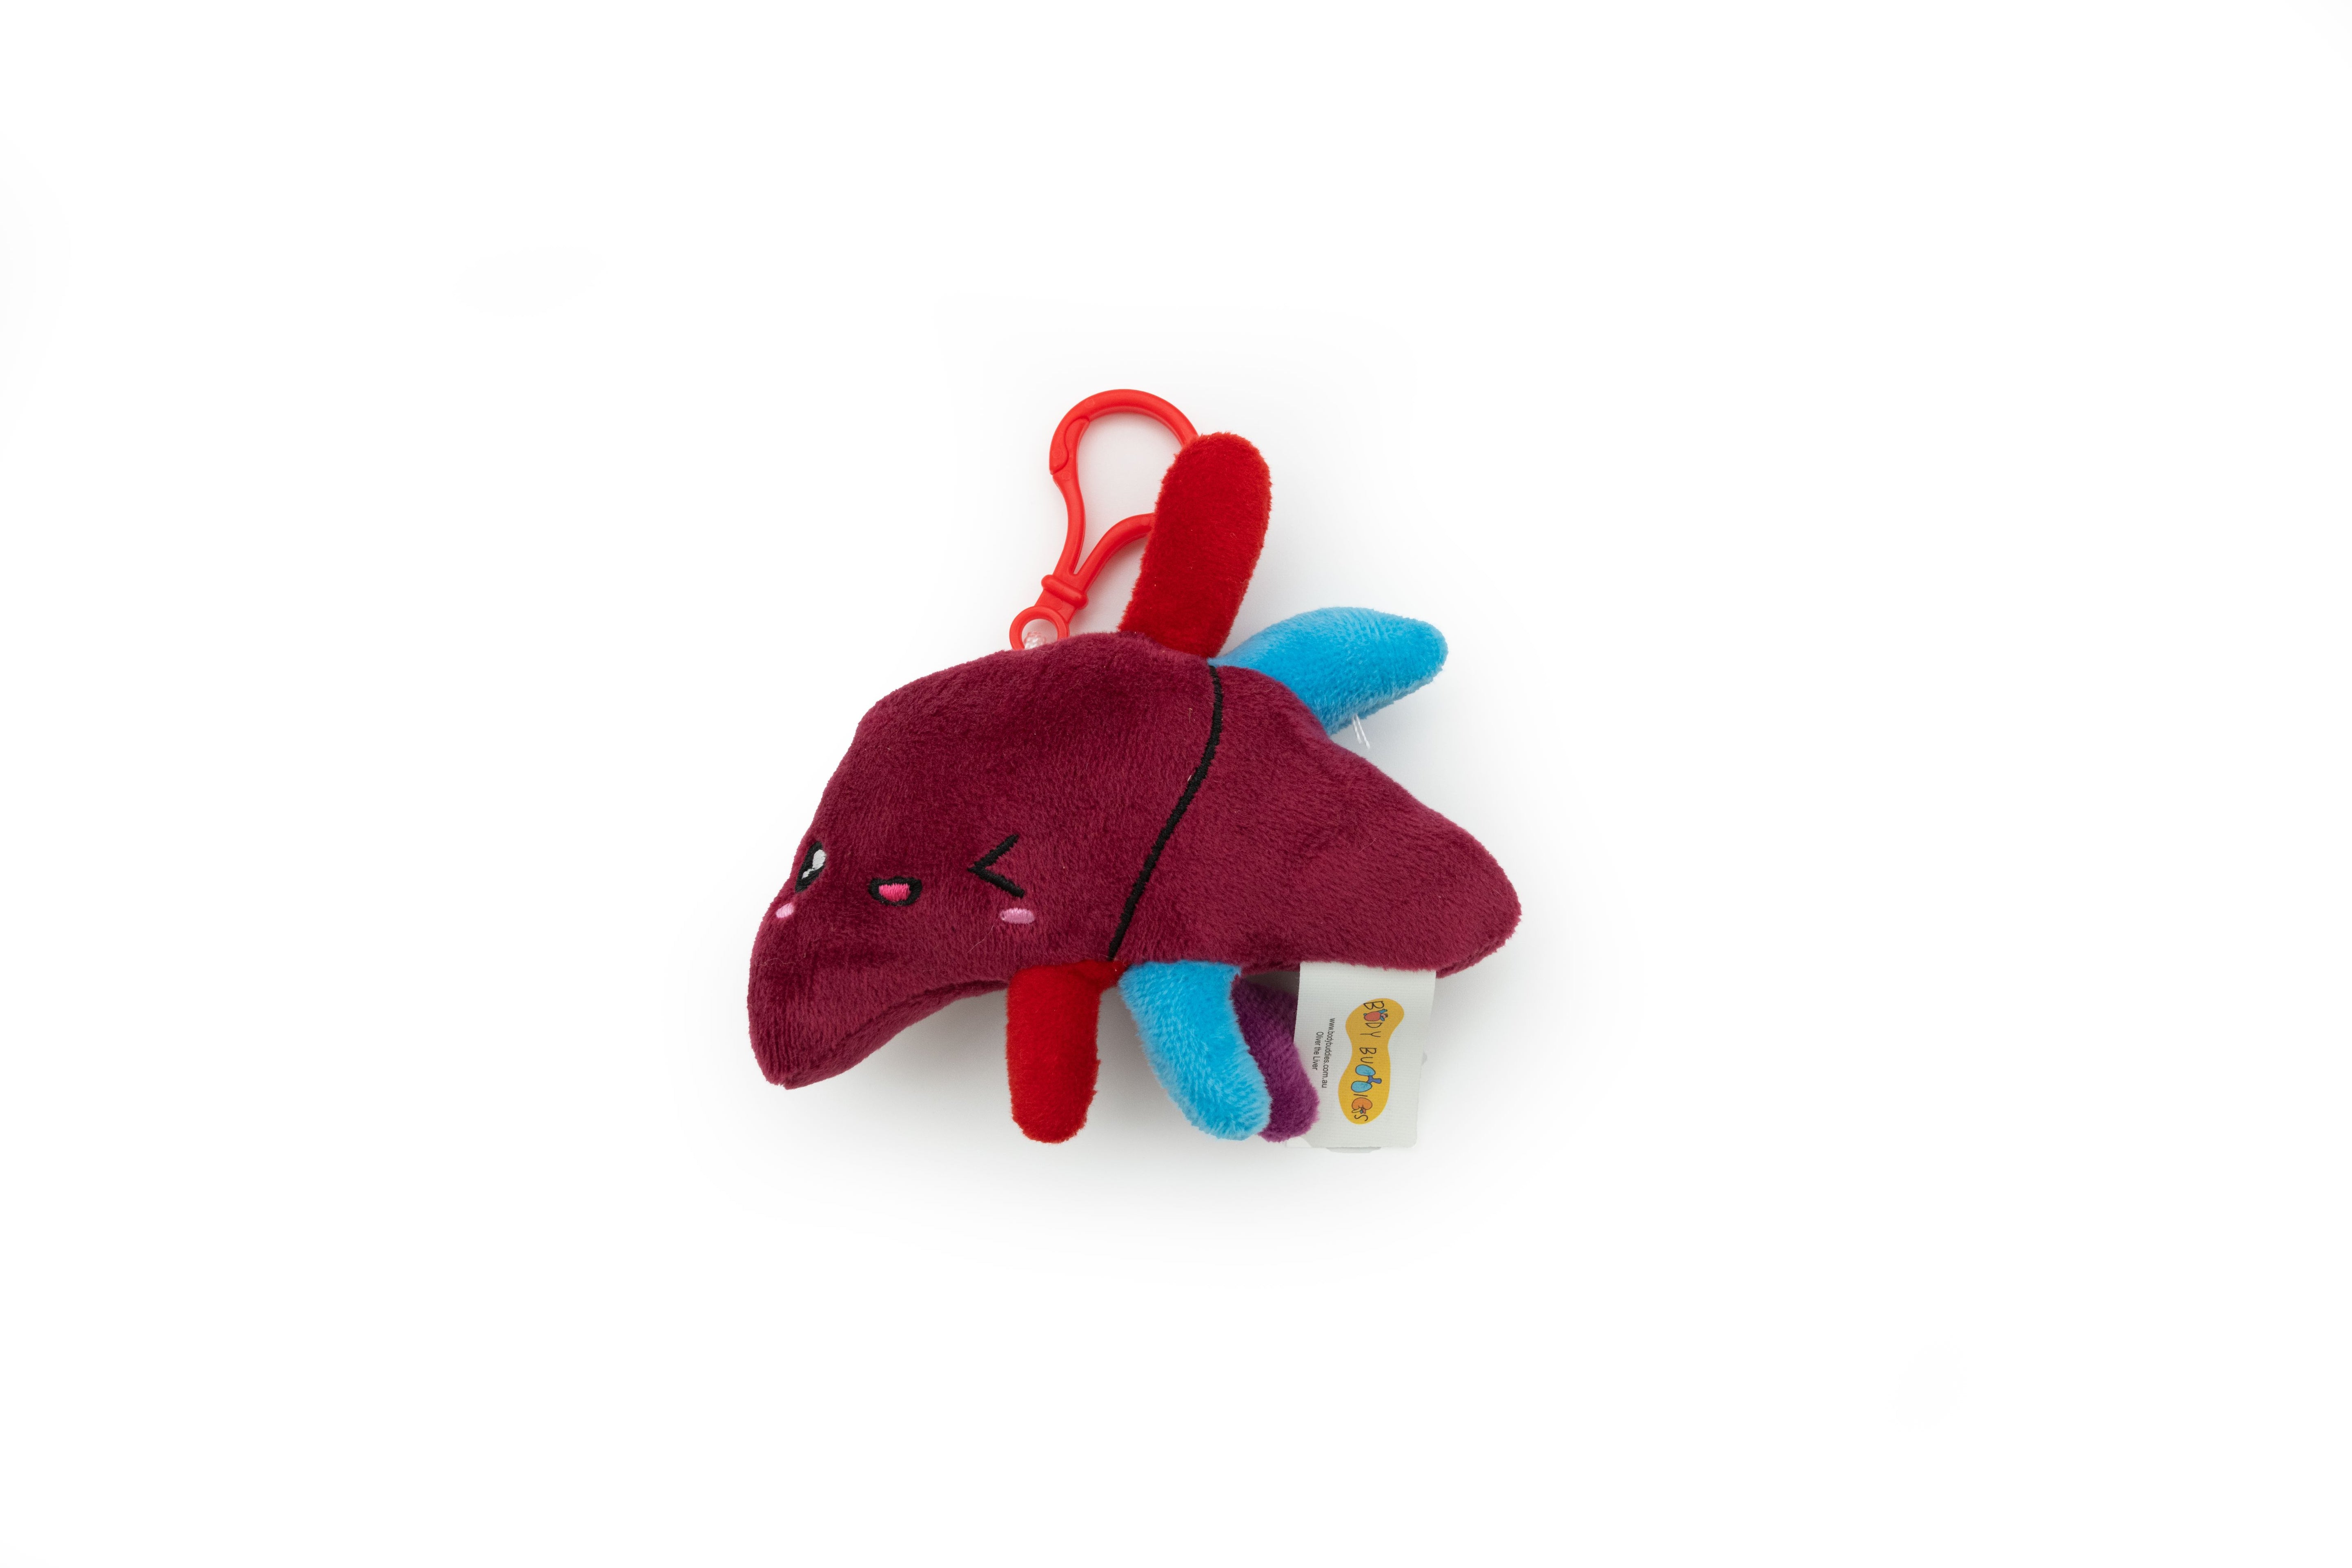 Oliver the Liver Keychain